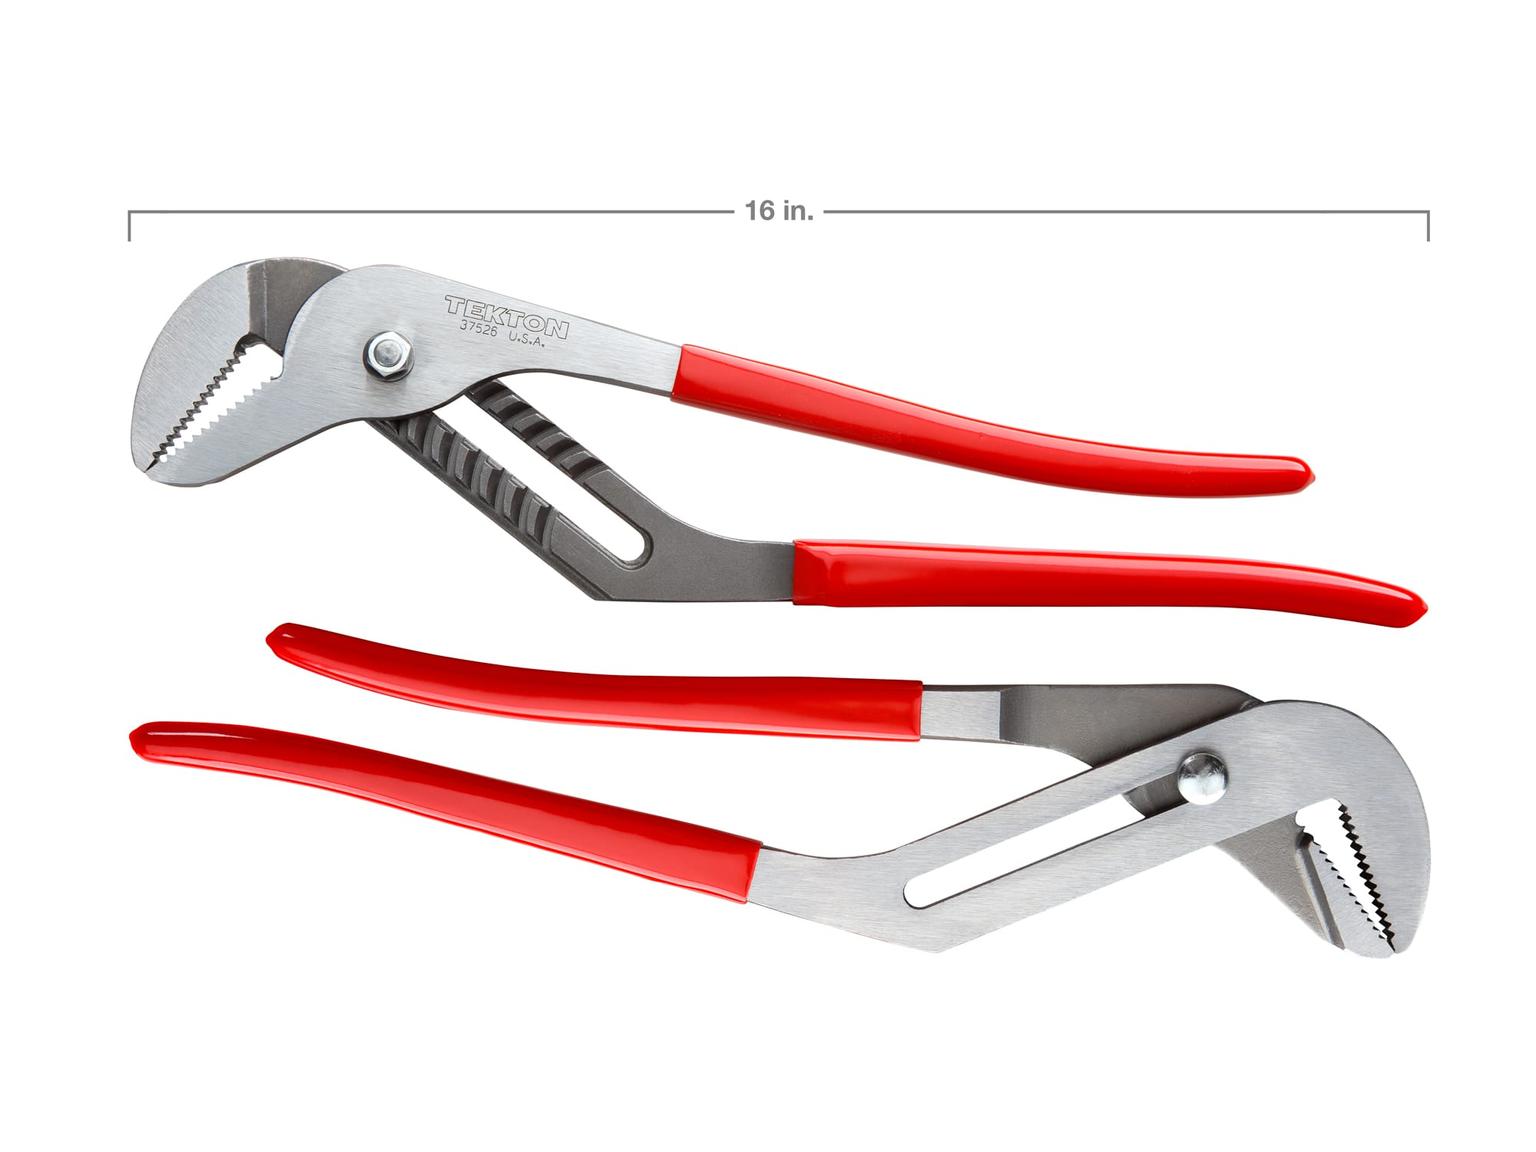 TEKTON 37526-T 16 Inch Groove Joint Pliers (4-1/4 in. Jaw)